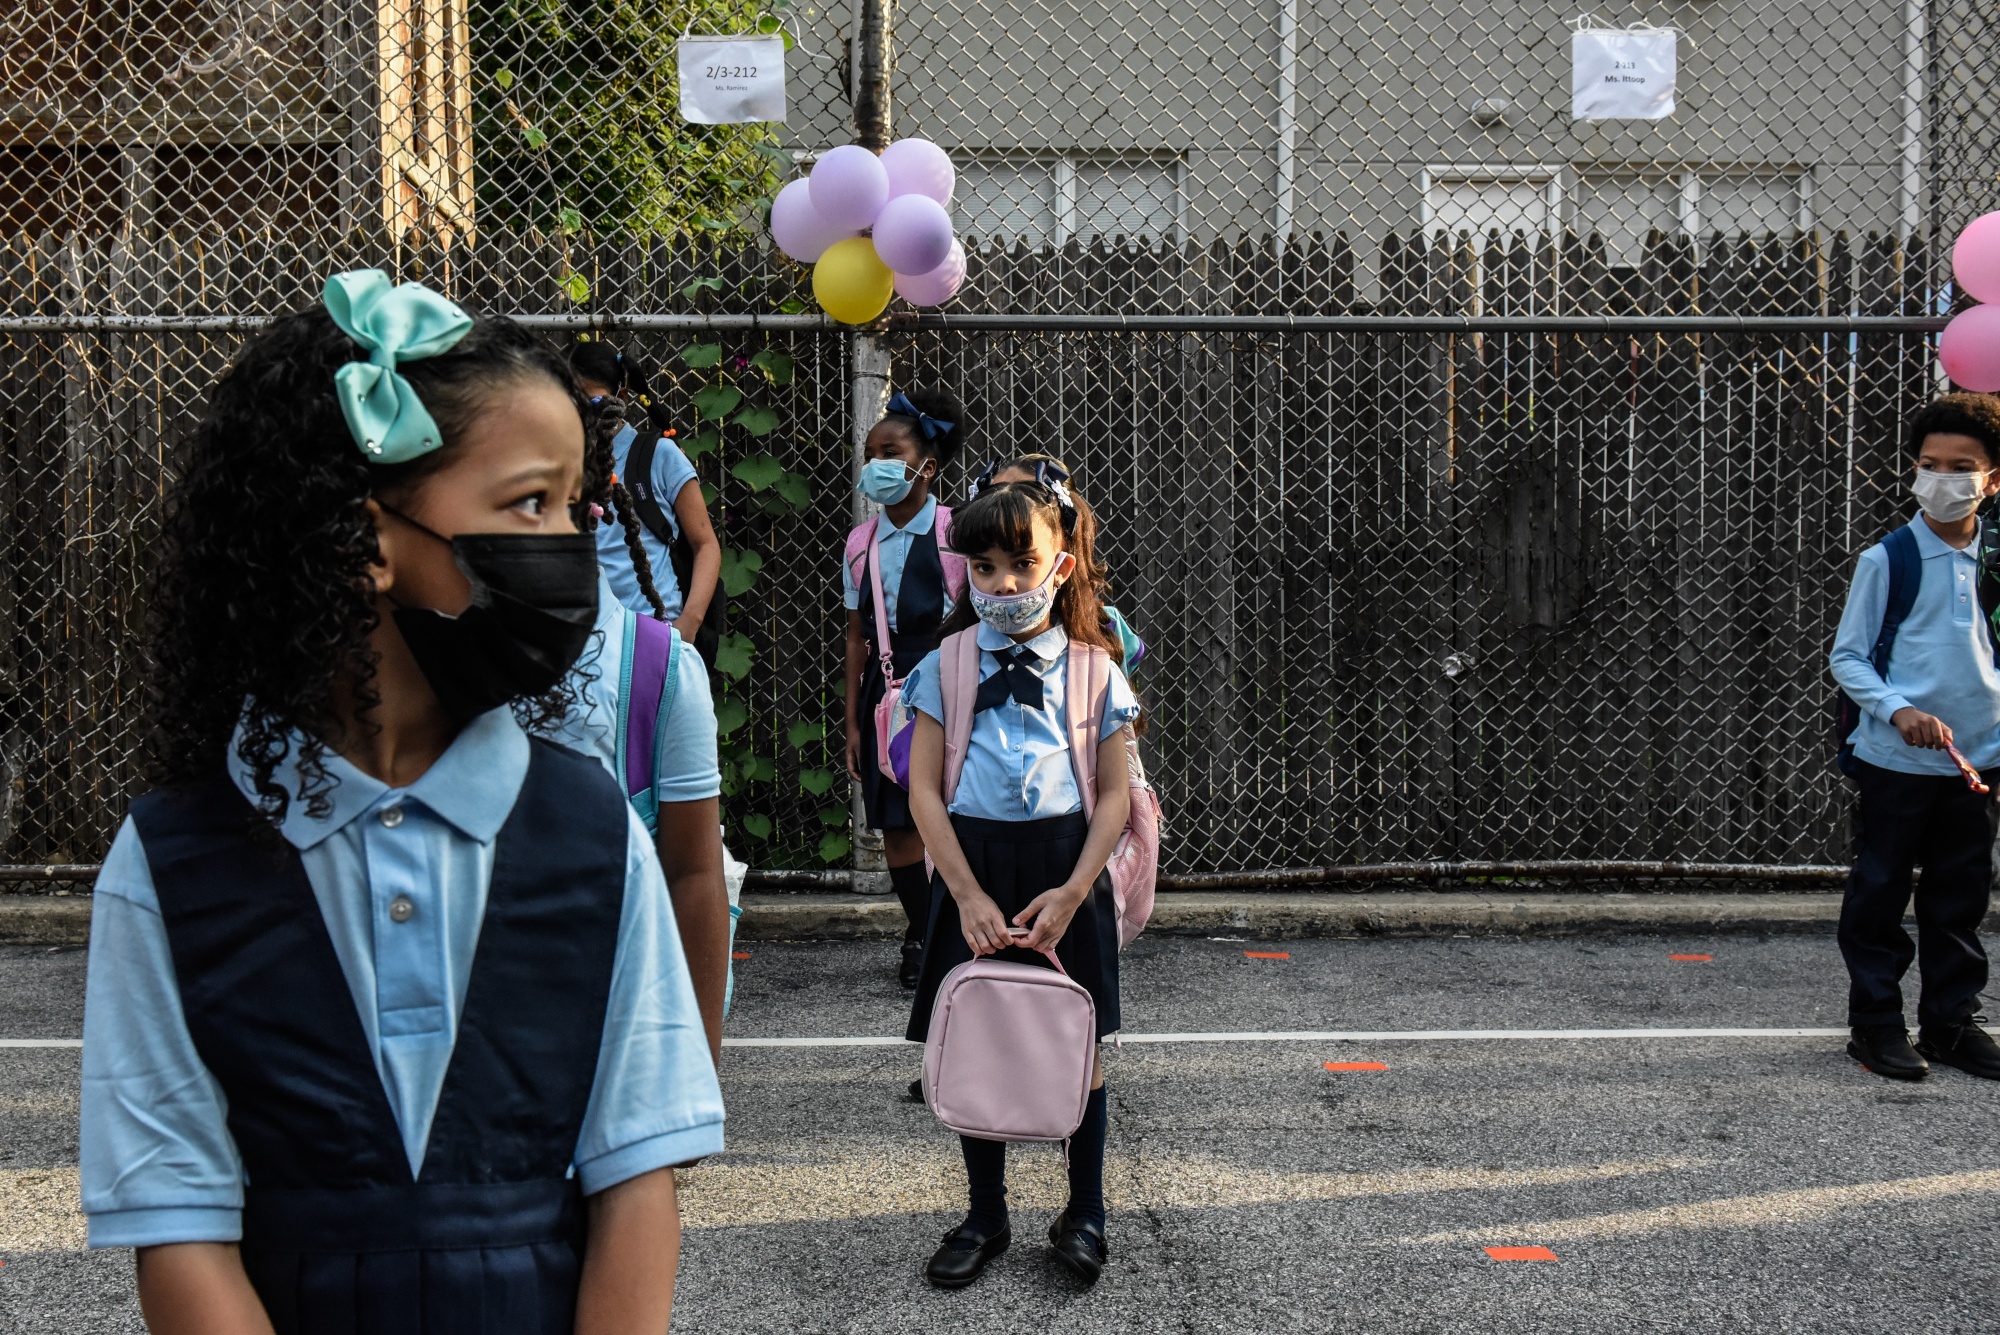 Students wait in line to enter a public school on the first classes in the Bronx borough in New York.